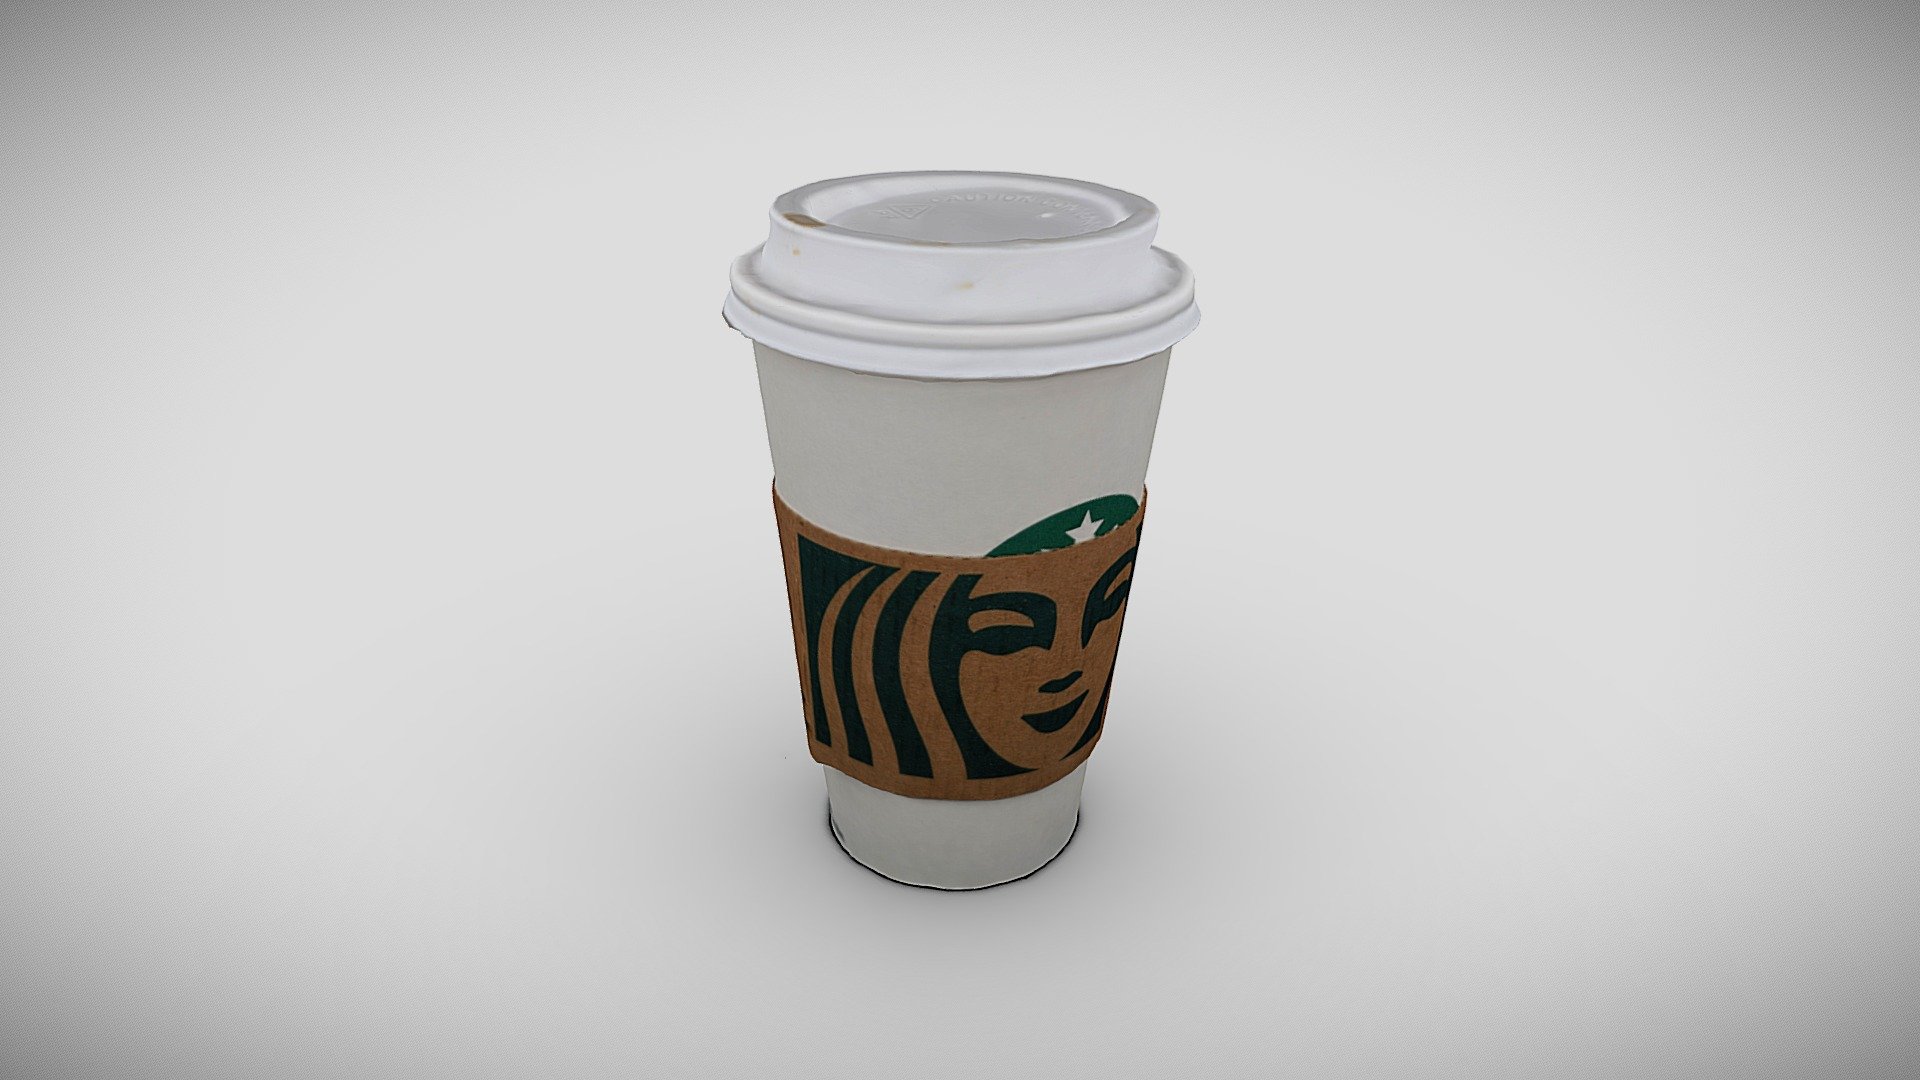 scan taken with a sony a7s2

thanks for checking out my model be sure to look at my other models on my store thanks!

Austinbeaulier.com - Starbucks cup scan - Download Free 3D model by Austin Beaulier (@Austin.Beaulier) 3d model